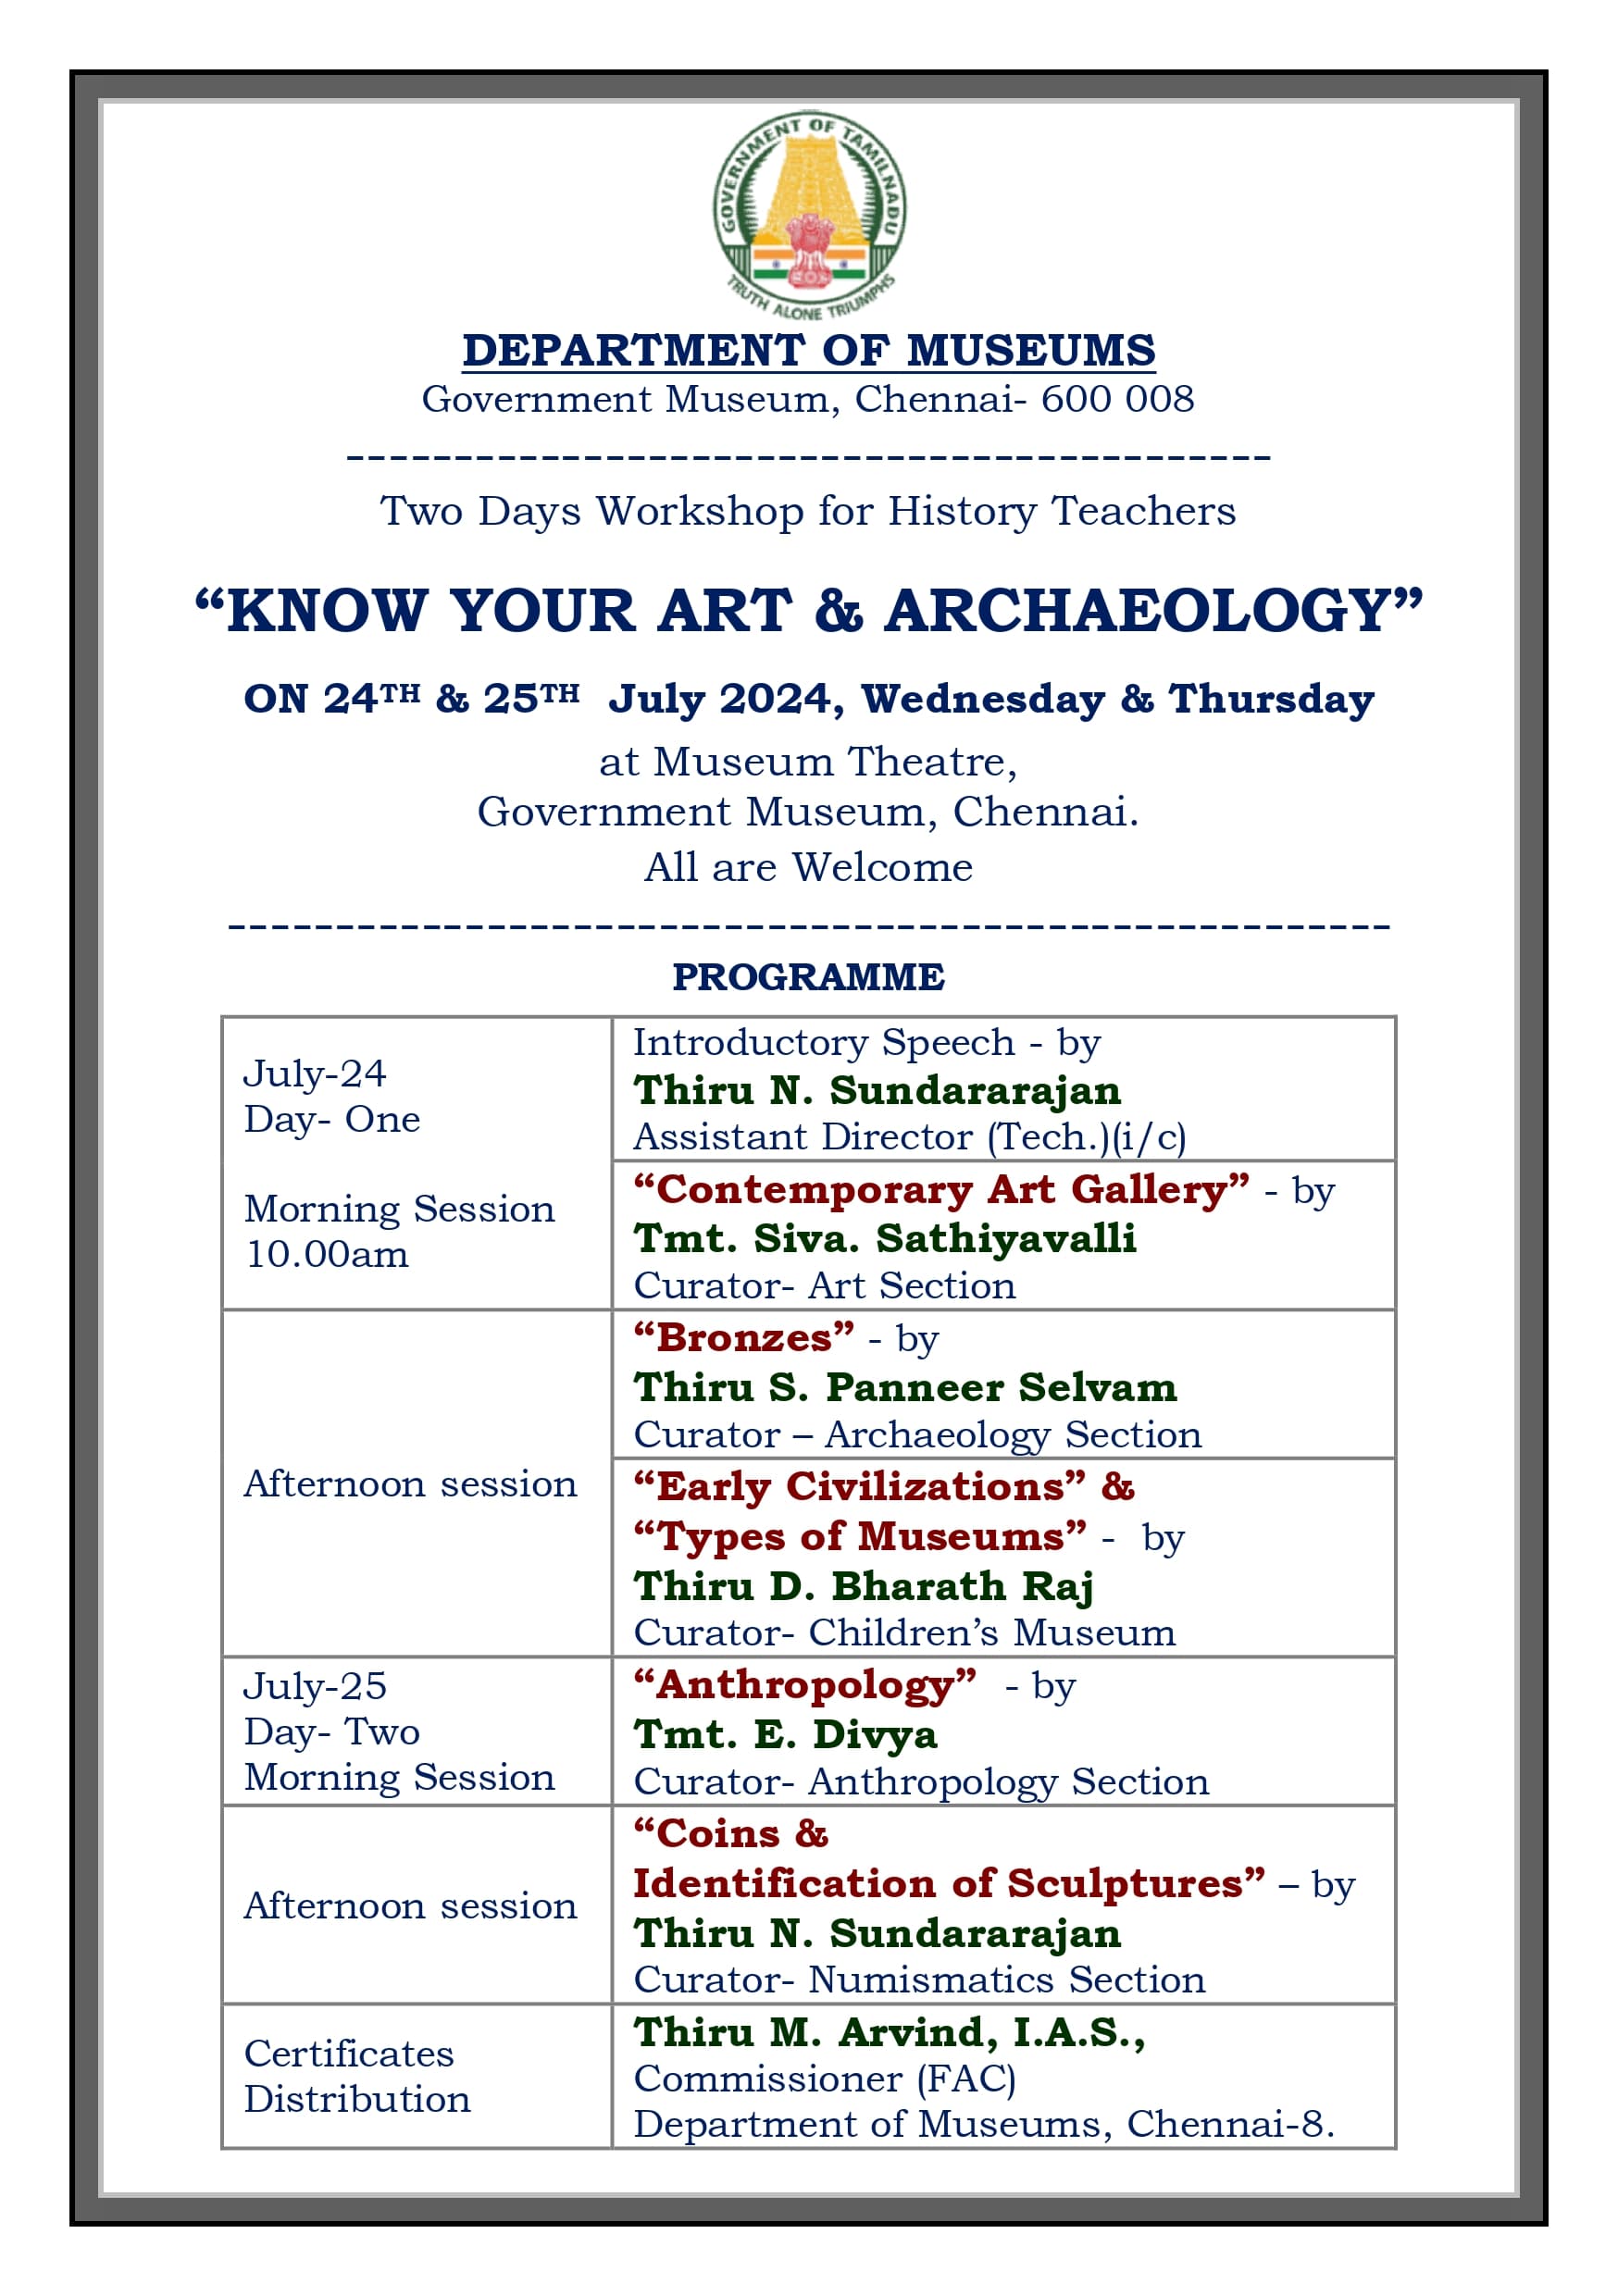 Know Your Art & Archaeology